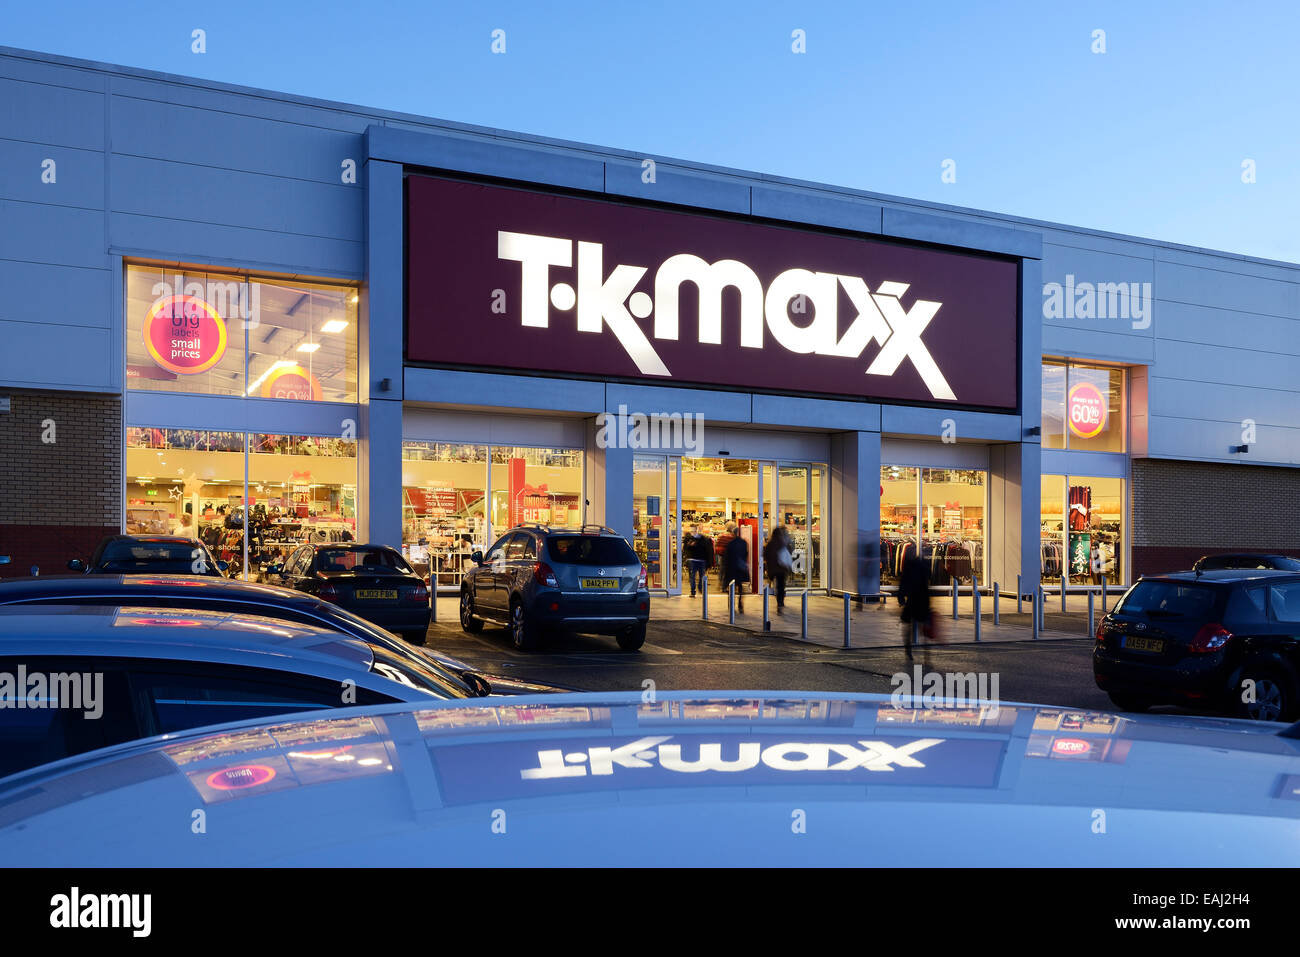 TK Maxx set to open new store NEXT WEEK at Oxfordshire retail park